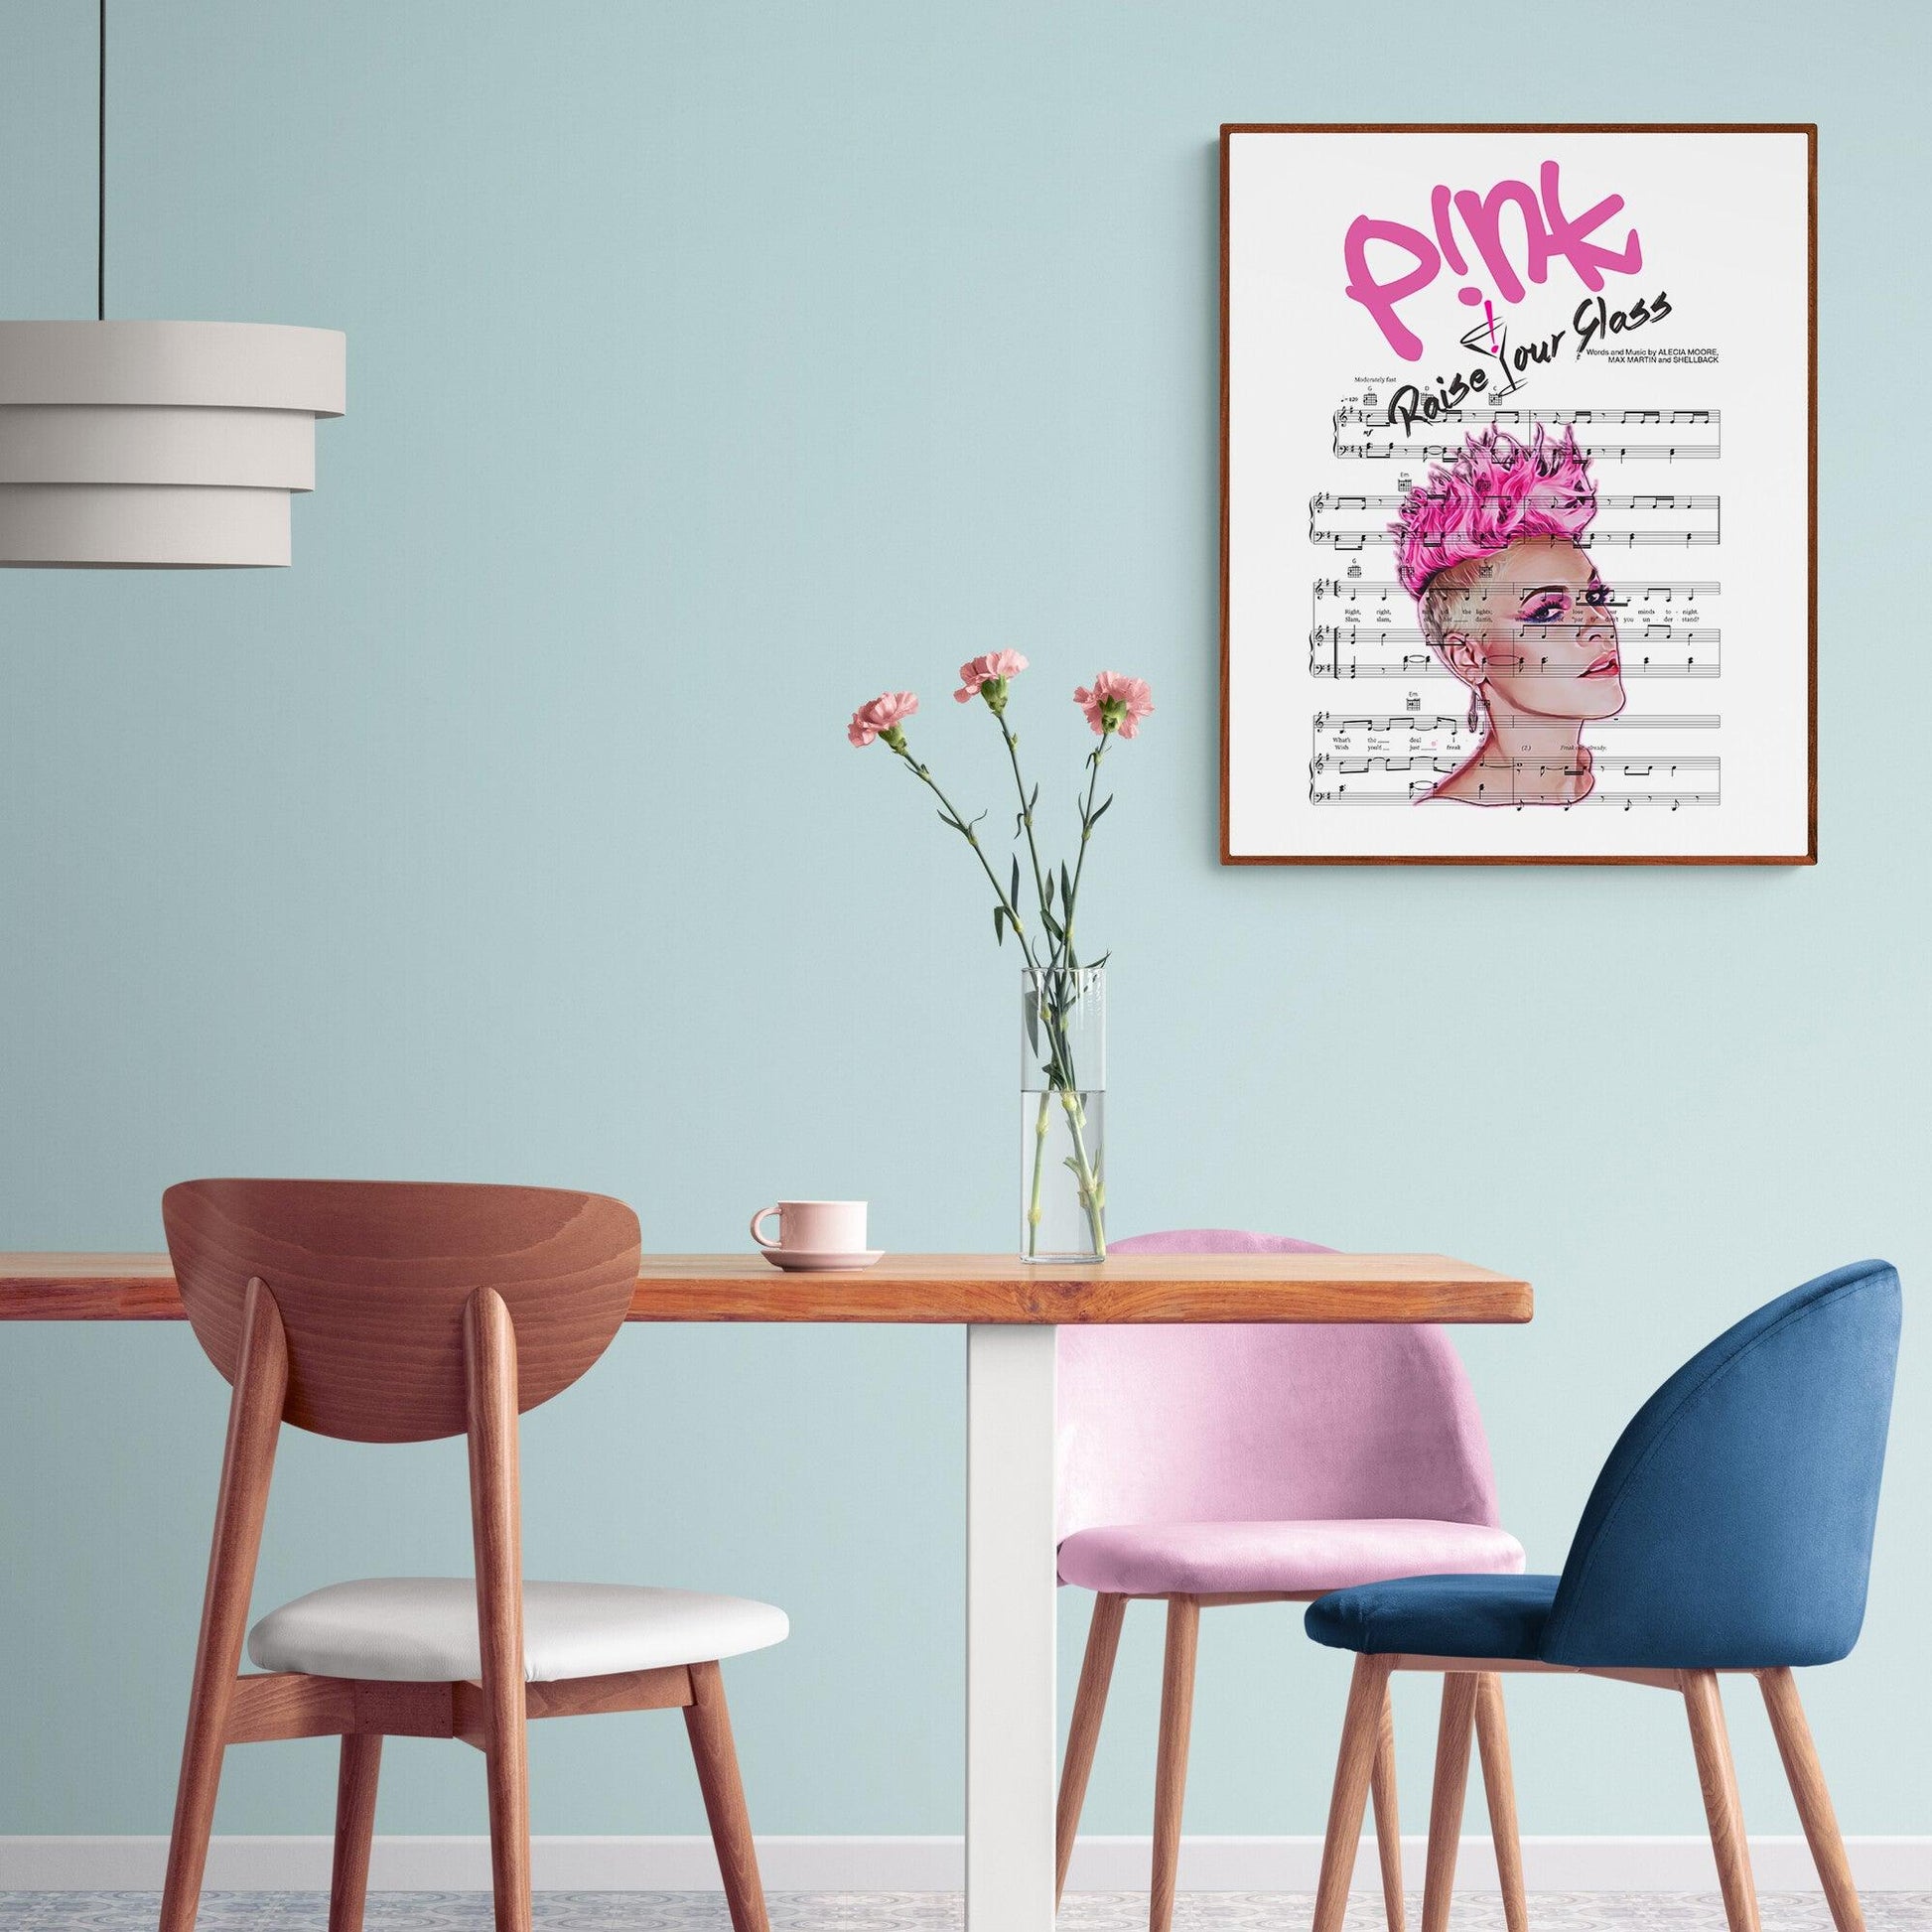 Skip the jams and raise your glass—let Pink's inspiring words bring a fun and humorous vibe to your walls!